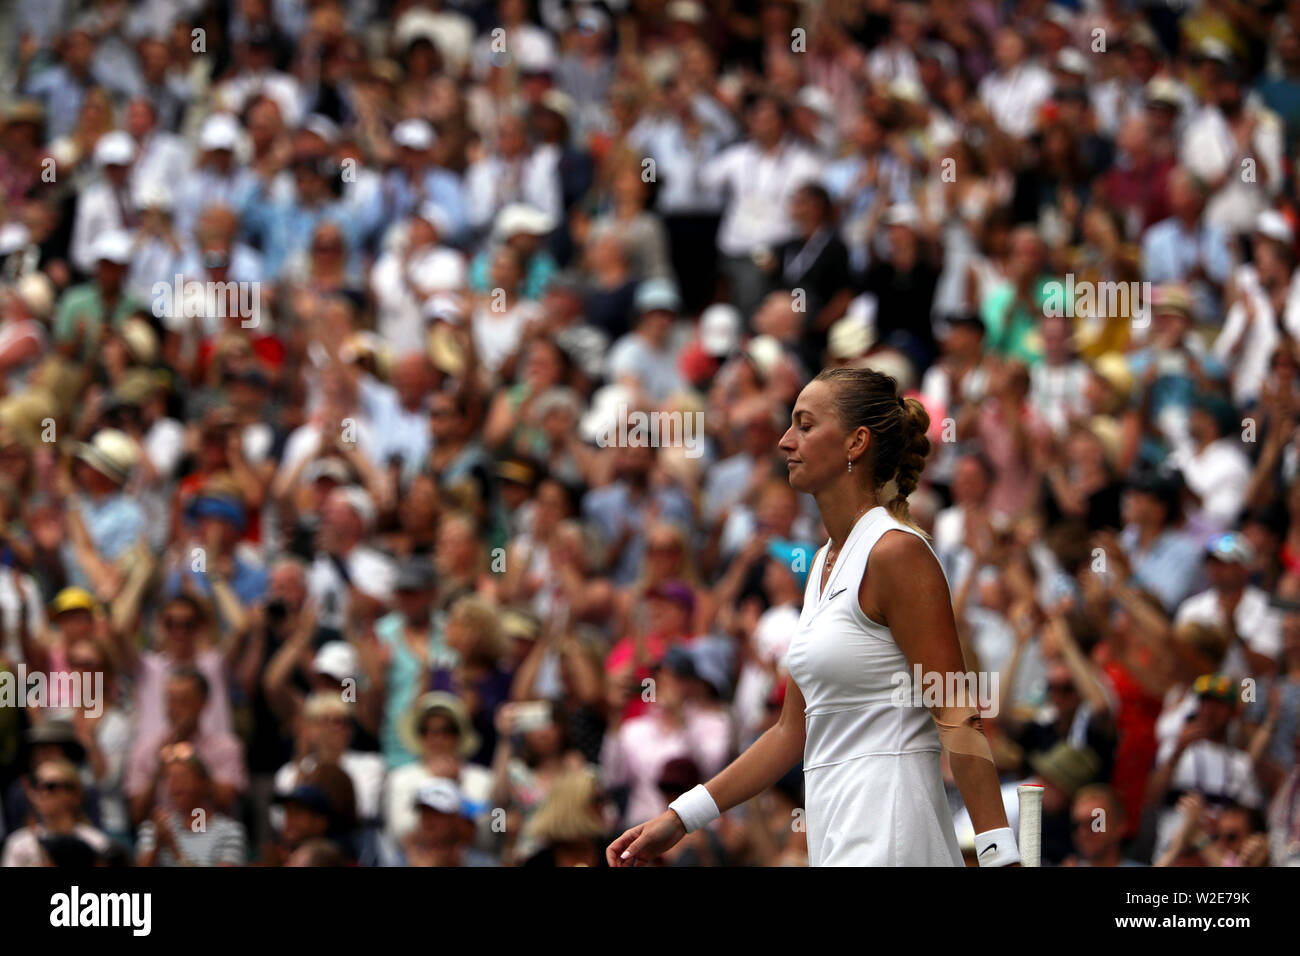 Wimbledon, London, UK. 8th July, 2019. Petra Kvitova after being defeated by Johanna Konta on Center Court during their fourth round match at Wimbledon today, Credit: Adam Stoltman/Alamy Live News Stock Photo